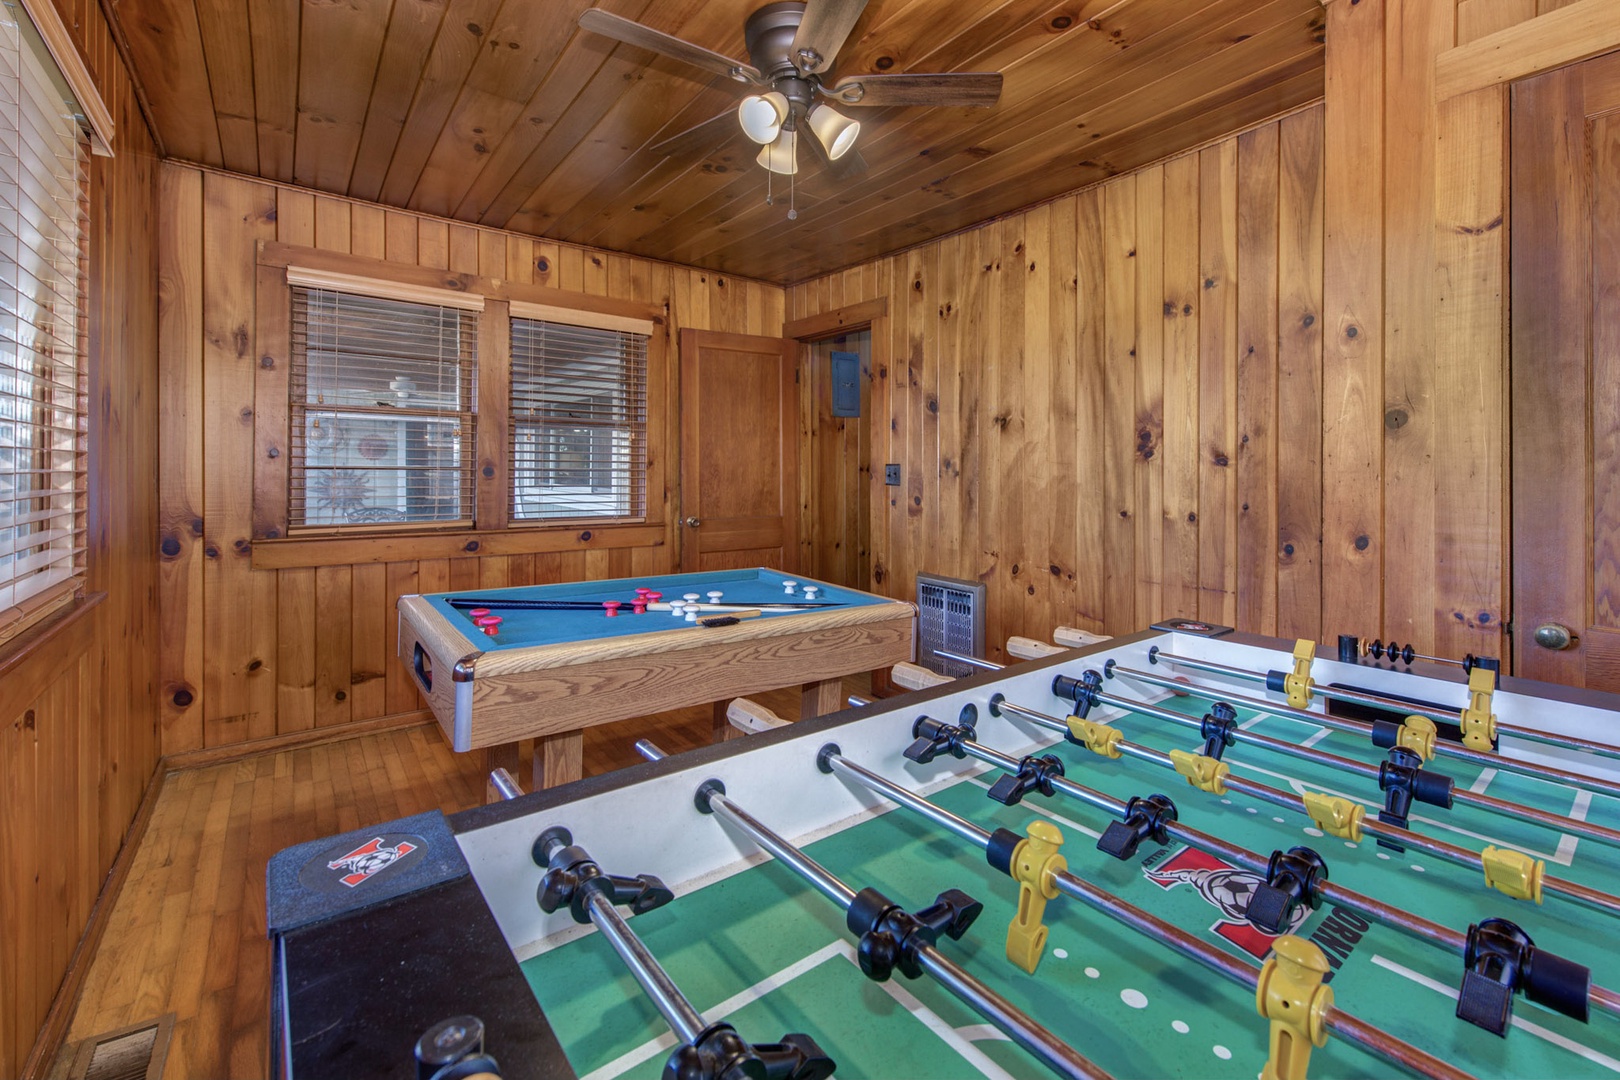 Fun for all in the game room with foosball table, and bumper pool